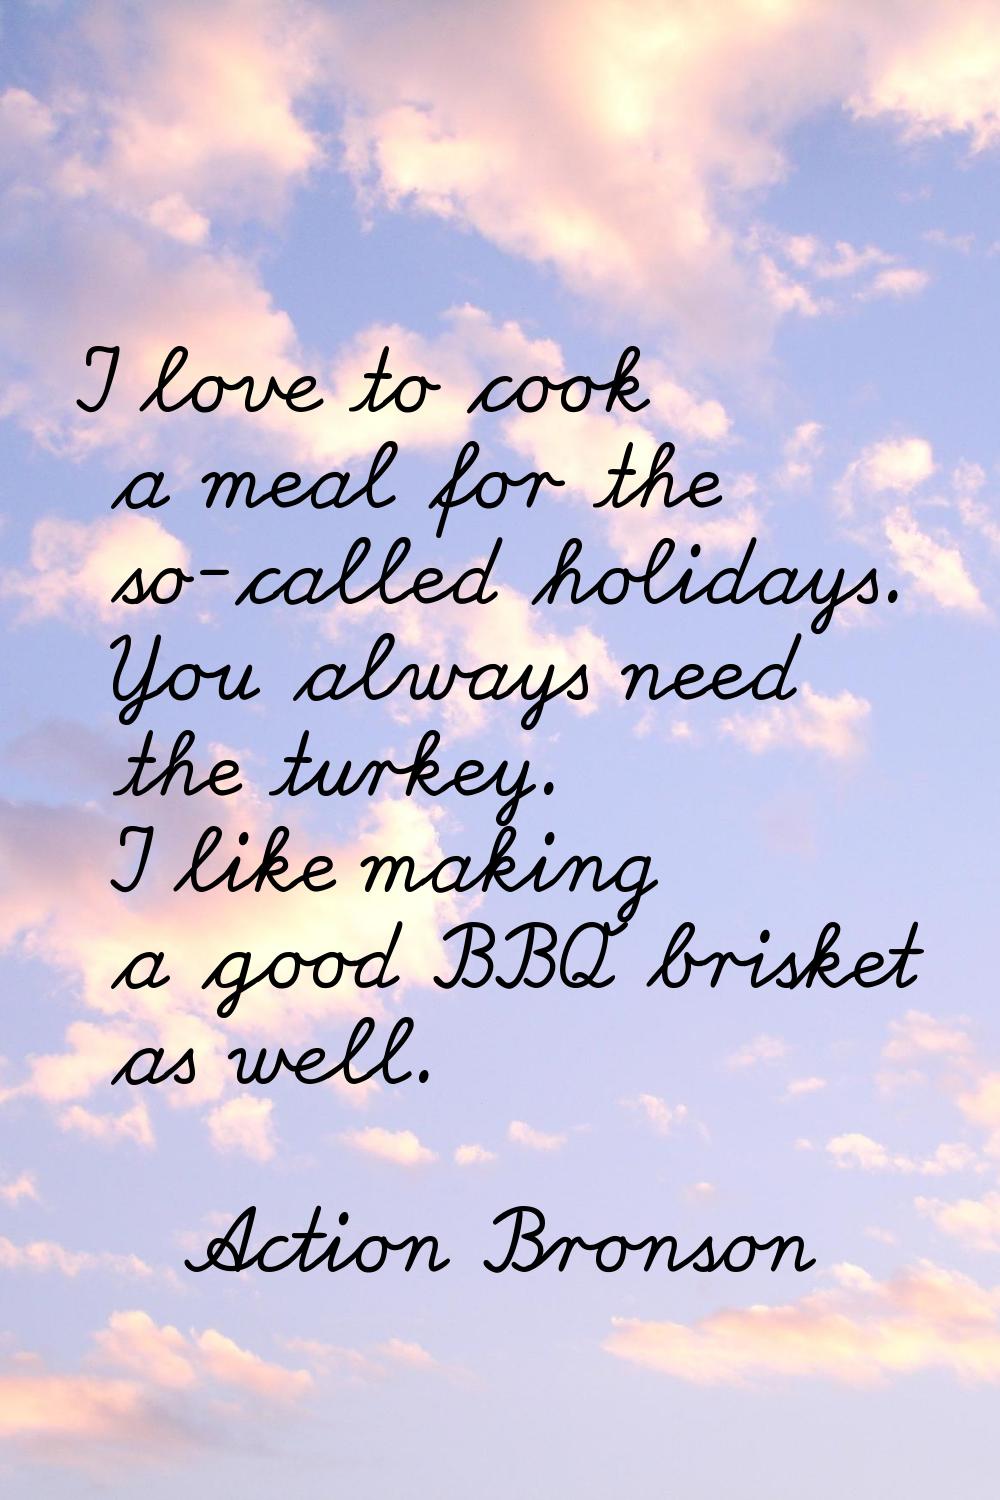 I love to cook a meal for the so-called holidays. You always need the turkey. I like making a good 